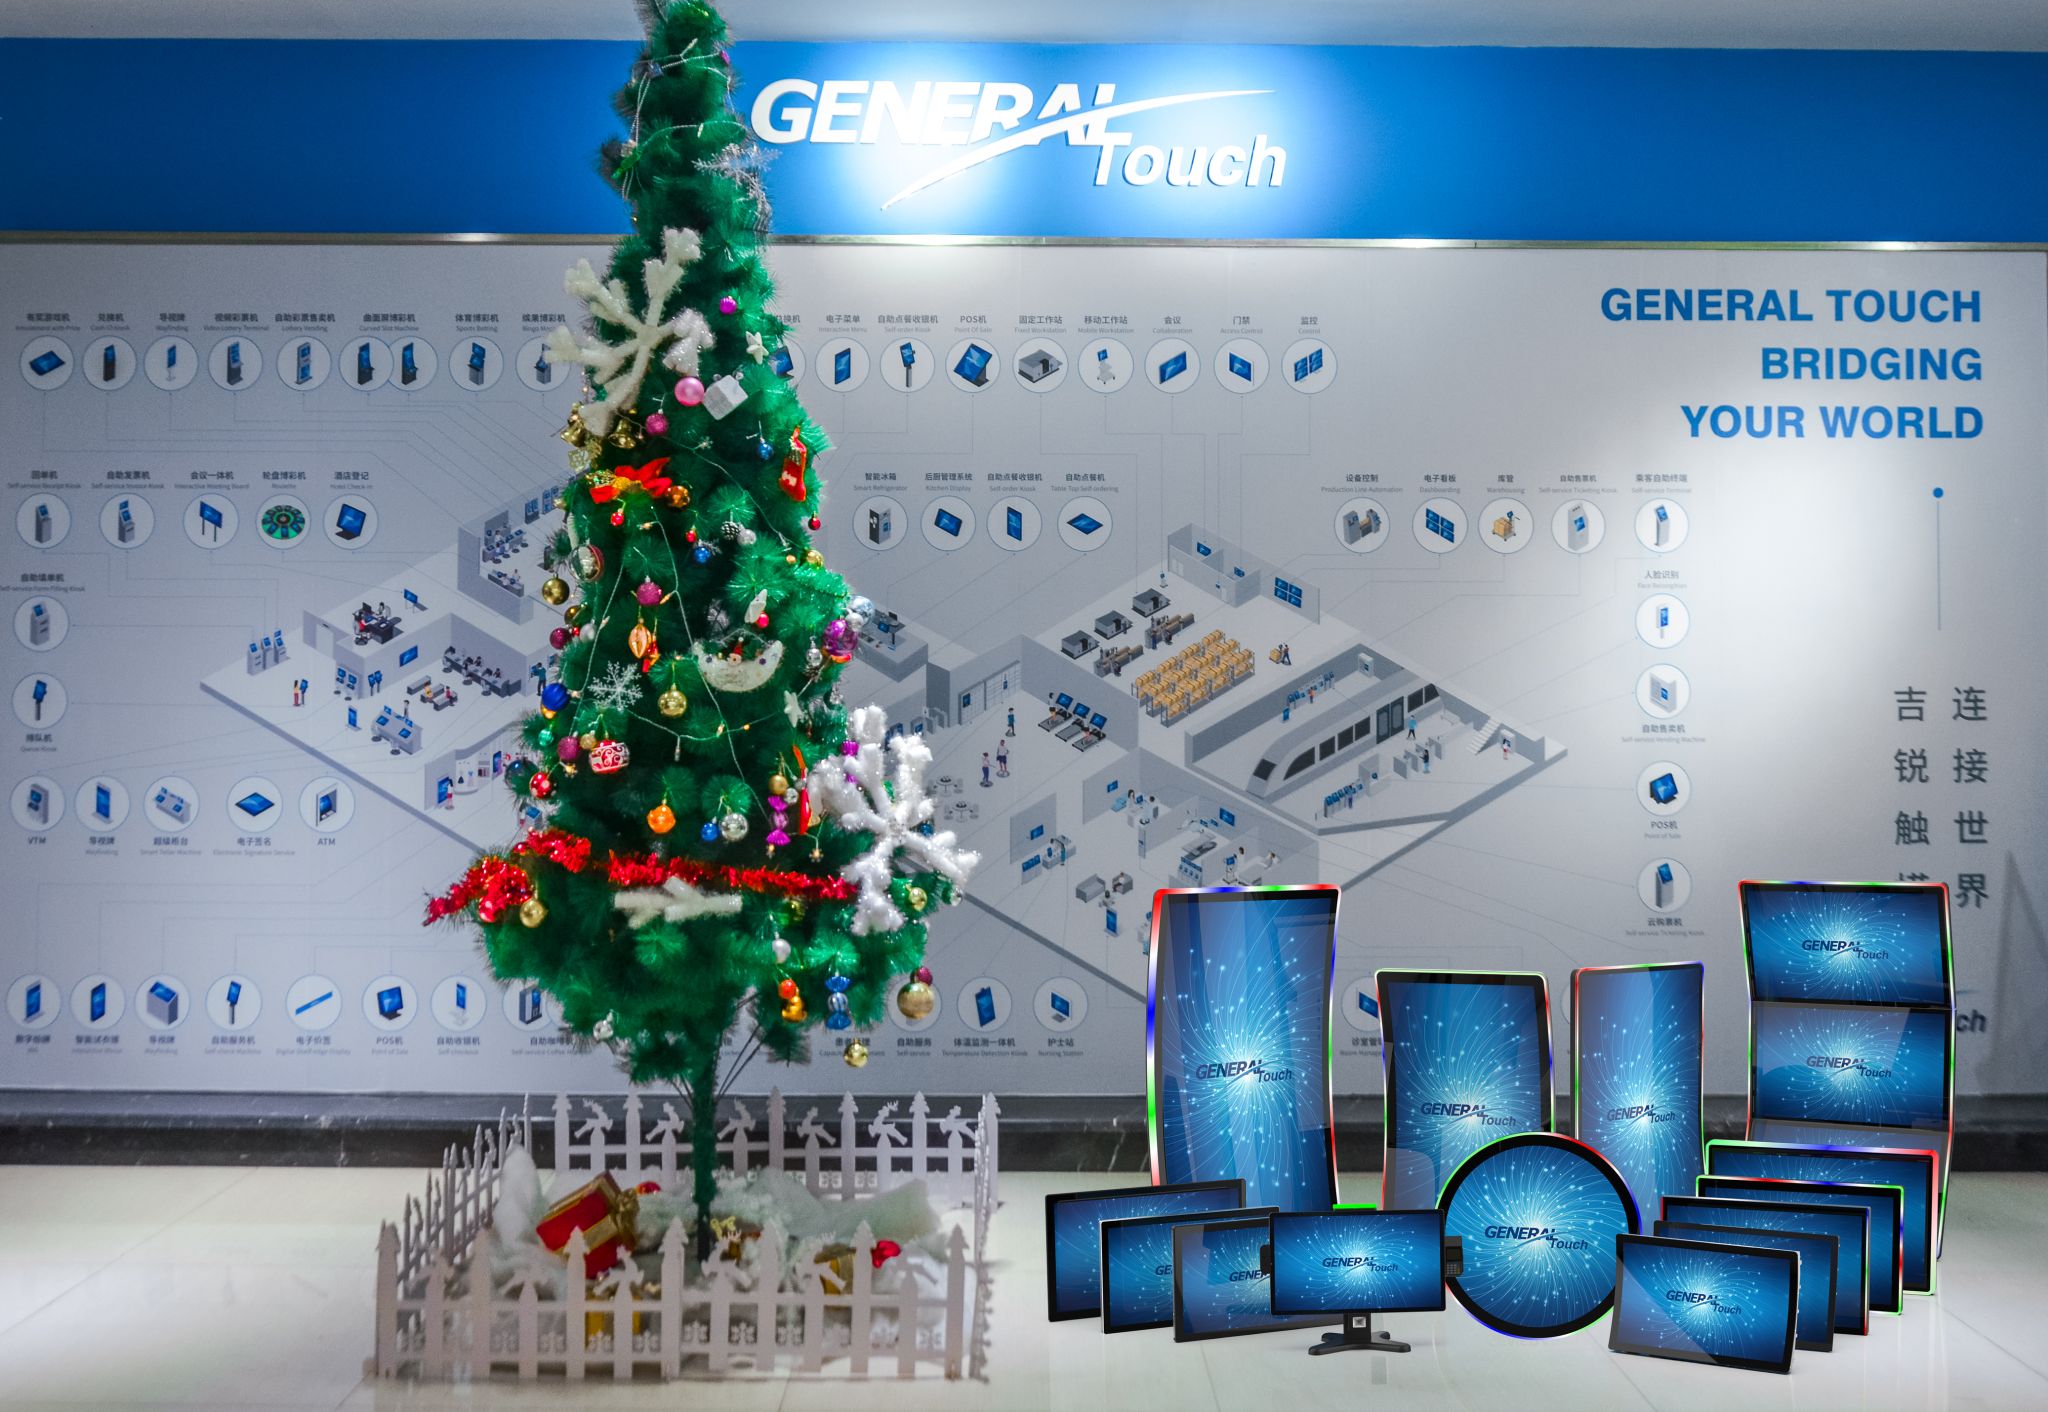 Happy Holidays from the General Touch team